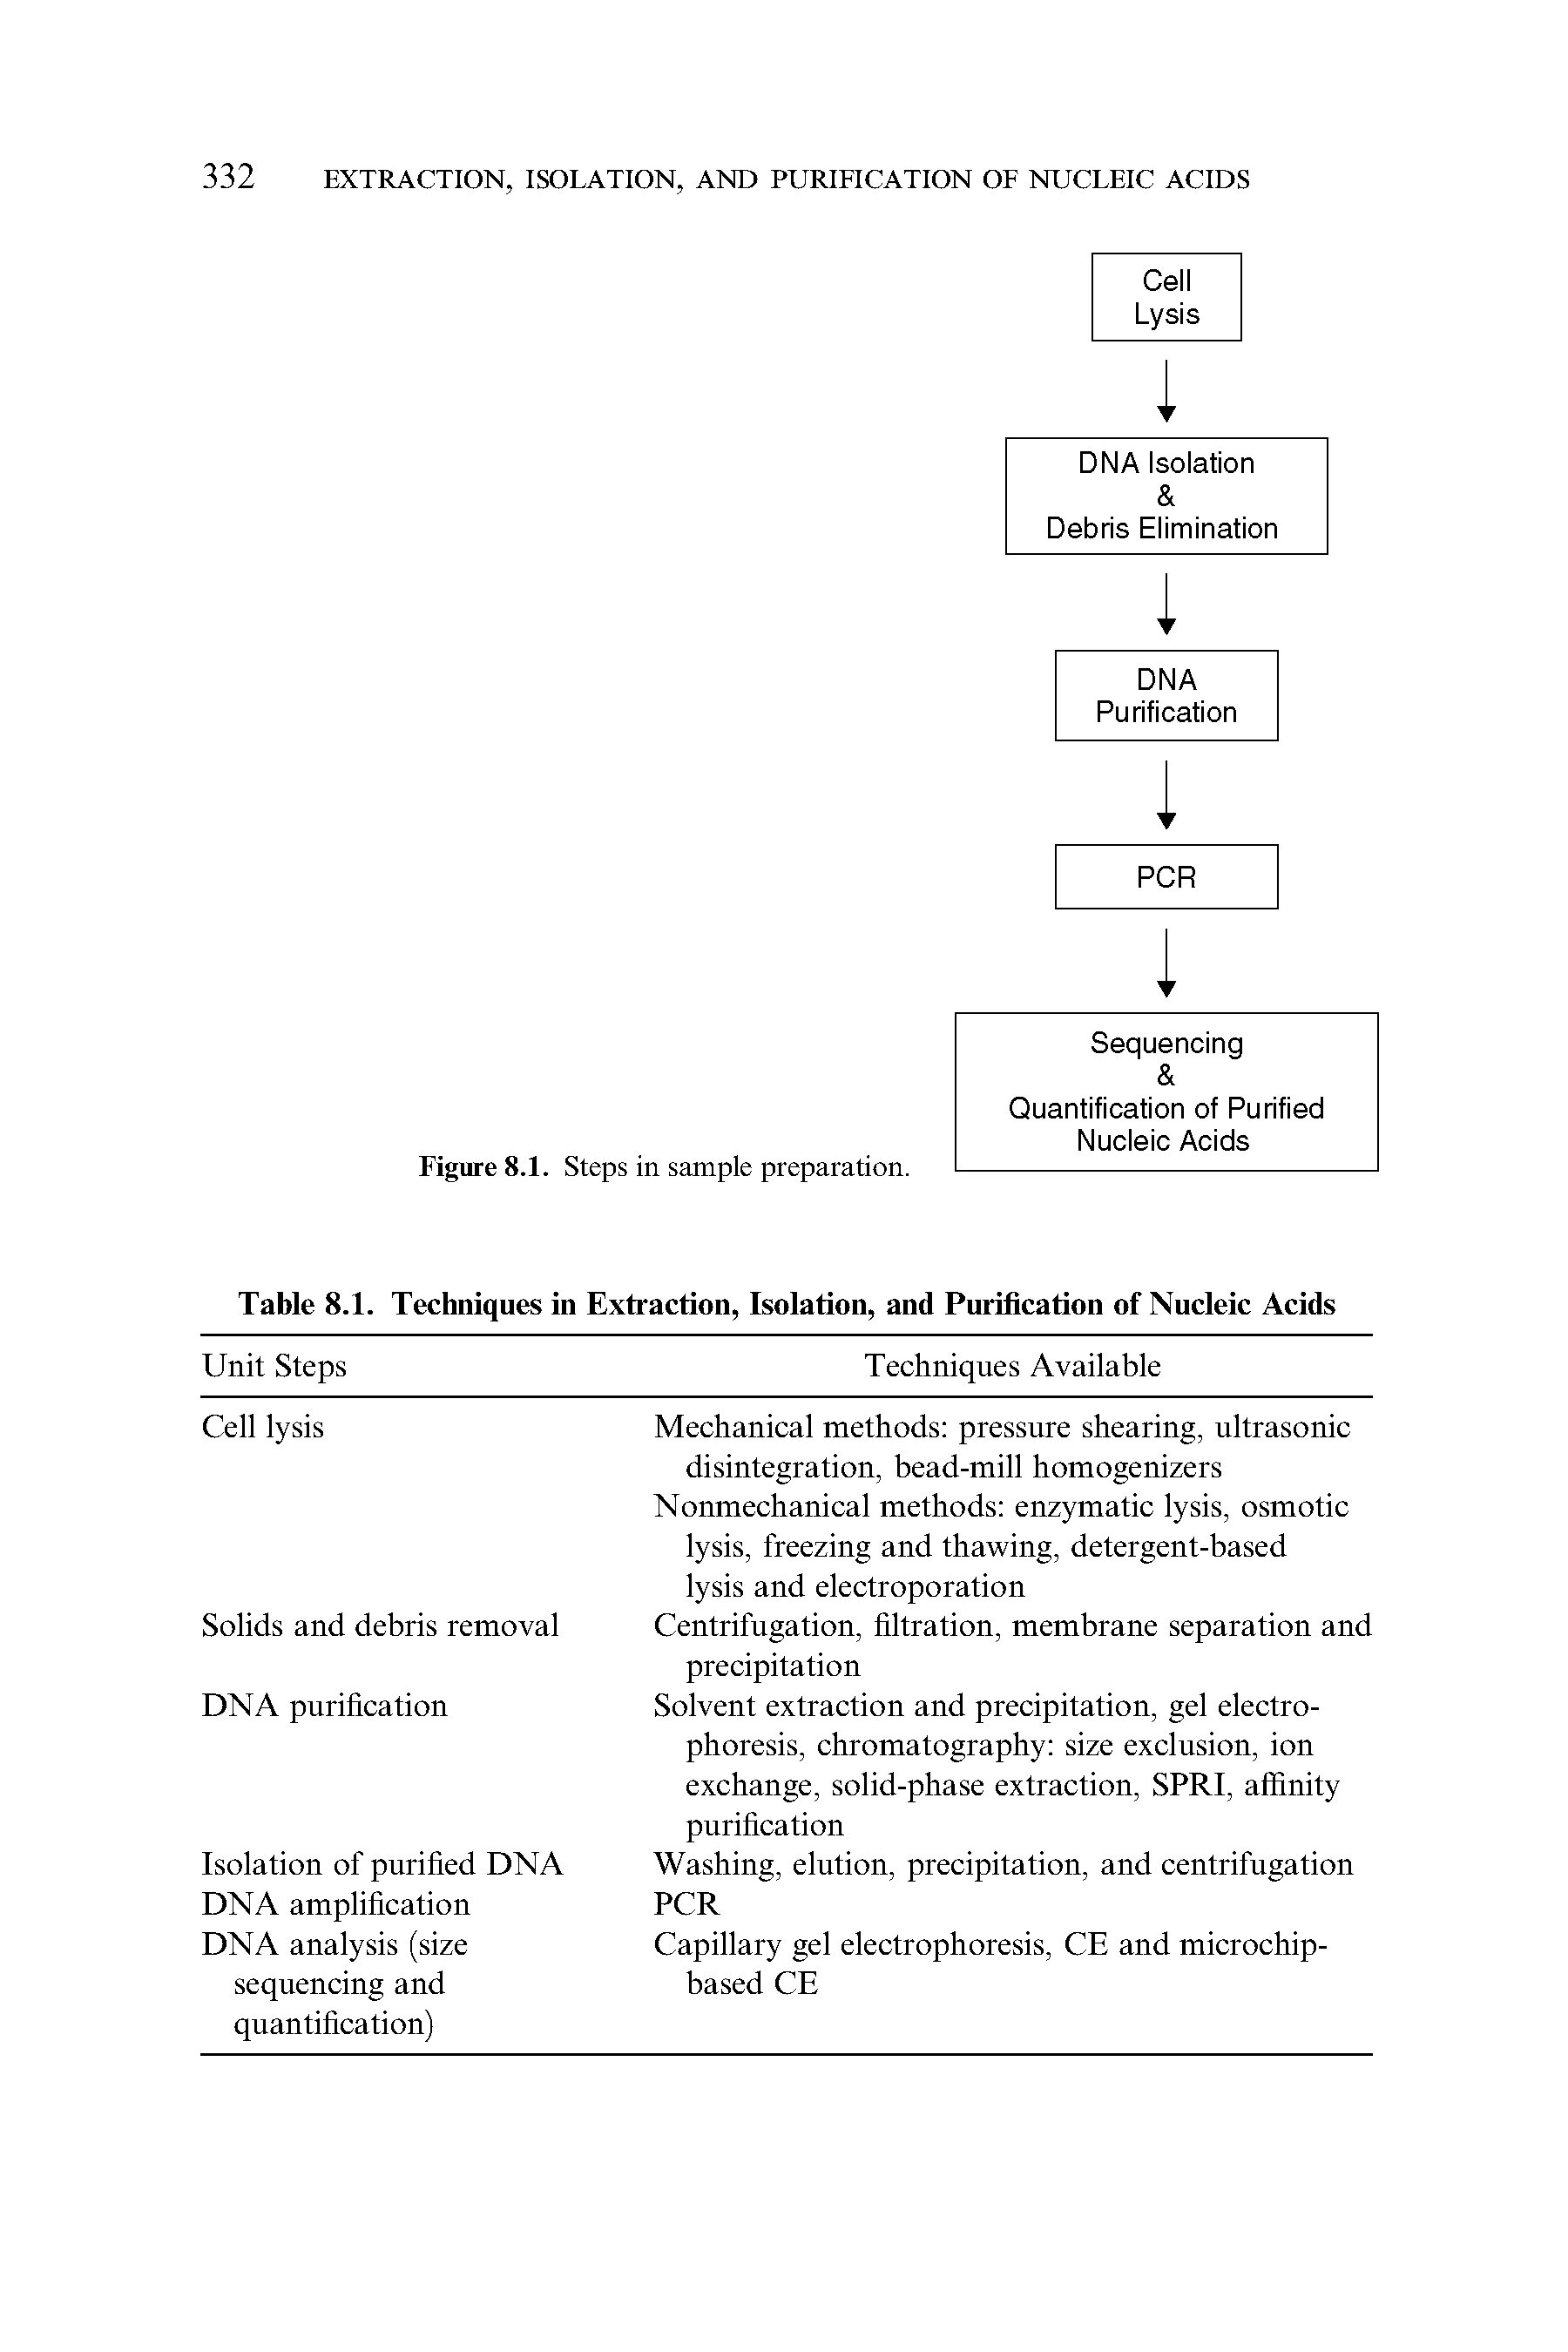 Table 8.1. Techniques in Extraction, Isolation, and Purification of Nucleic Acids...